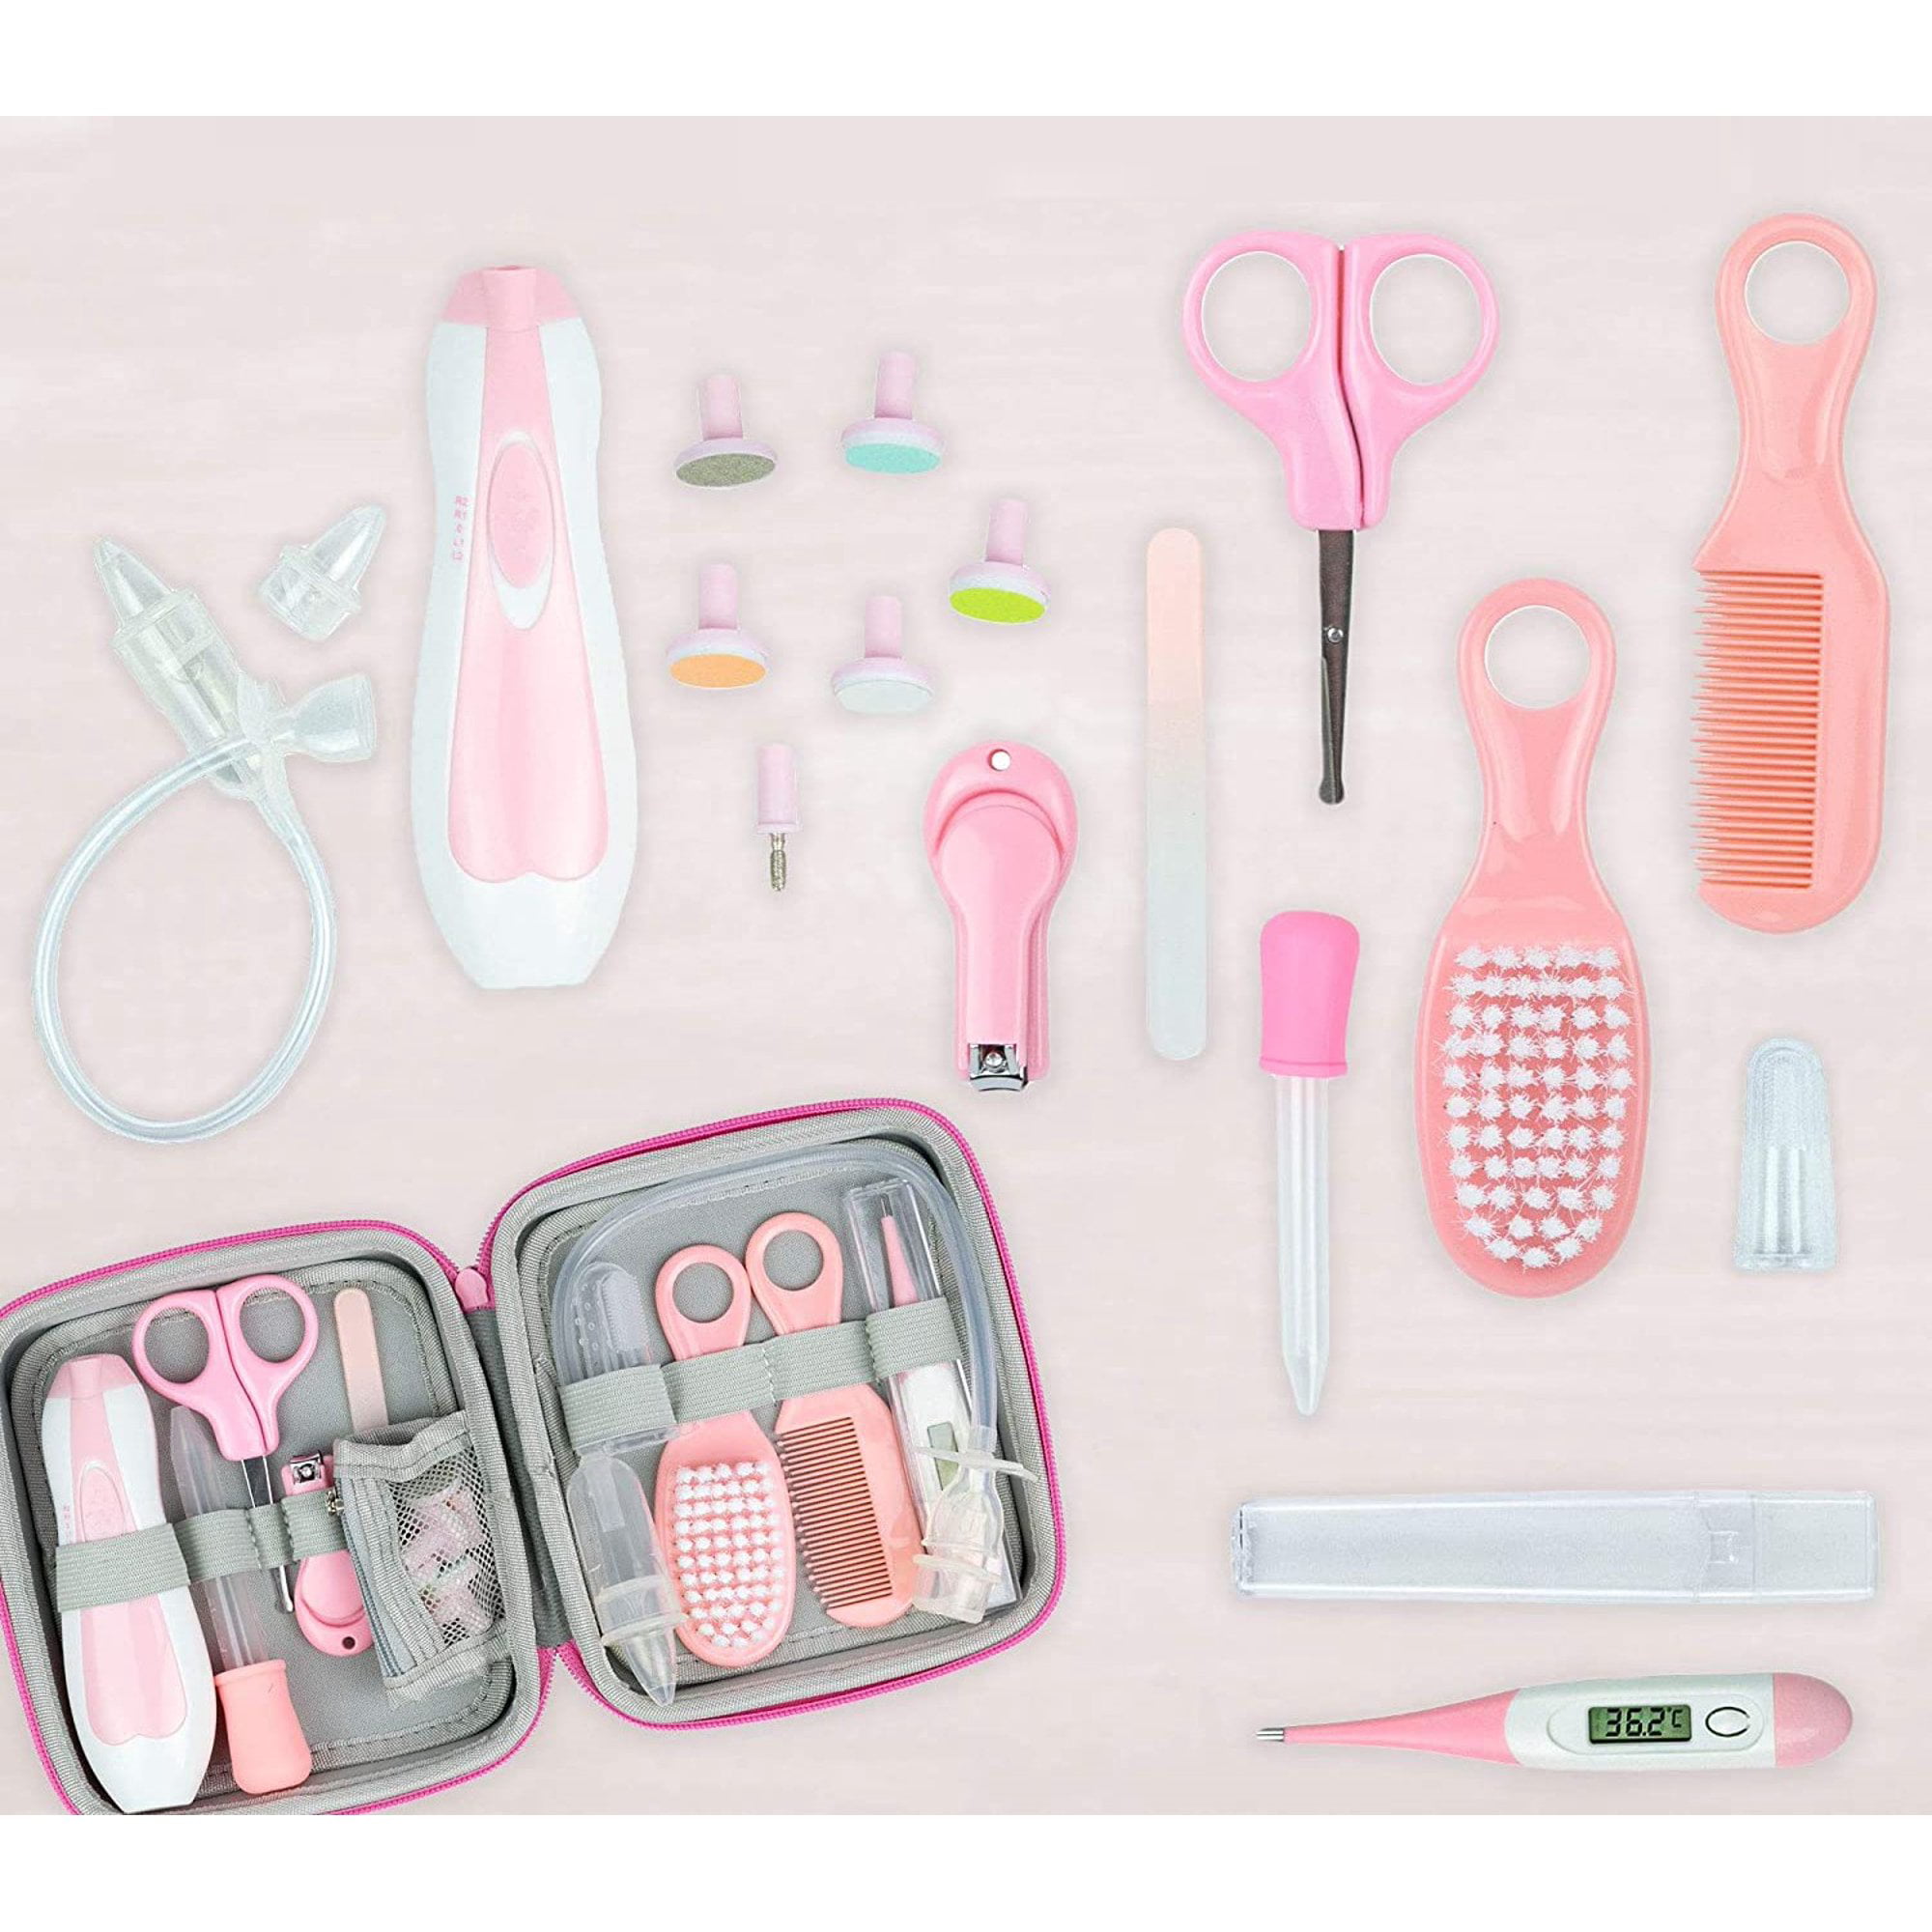 10Pc Baby Healthcare Grooming Kit for Girls - Nail Clipper, Glass Nail  File, etc